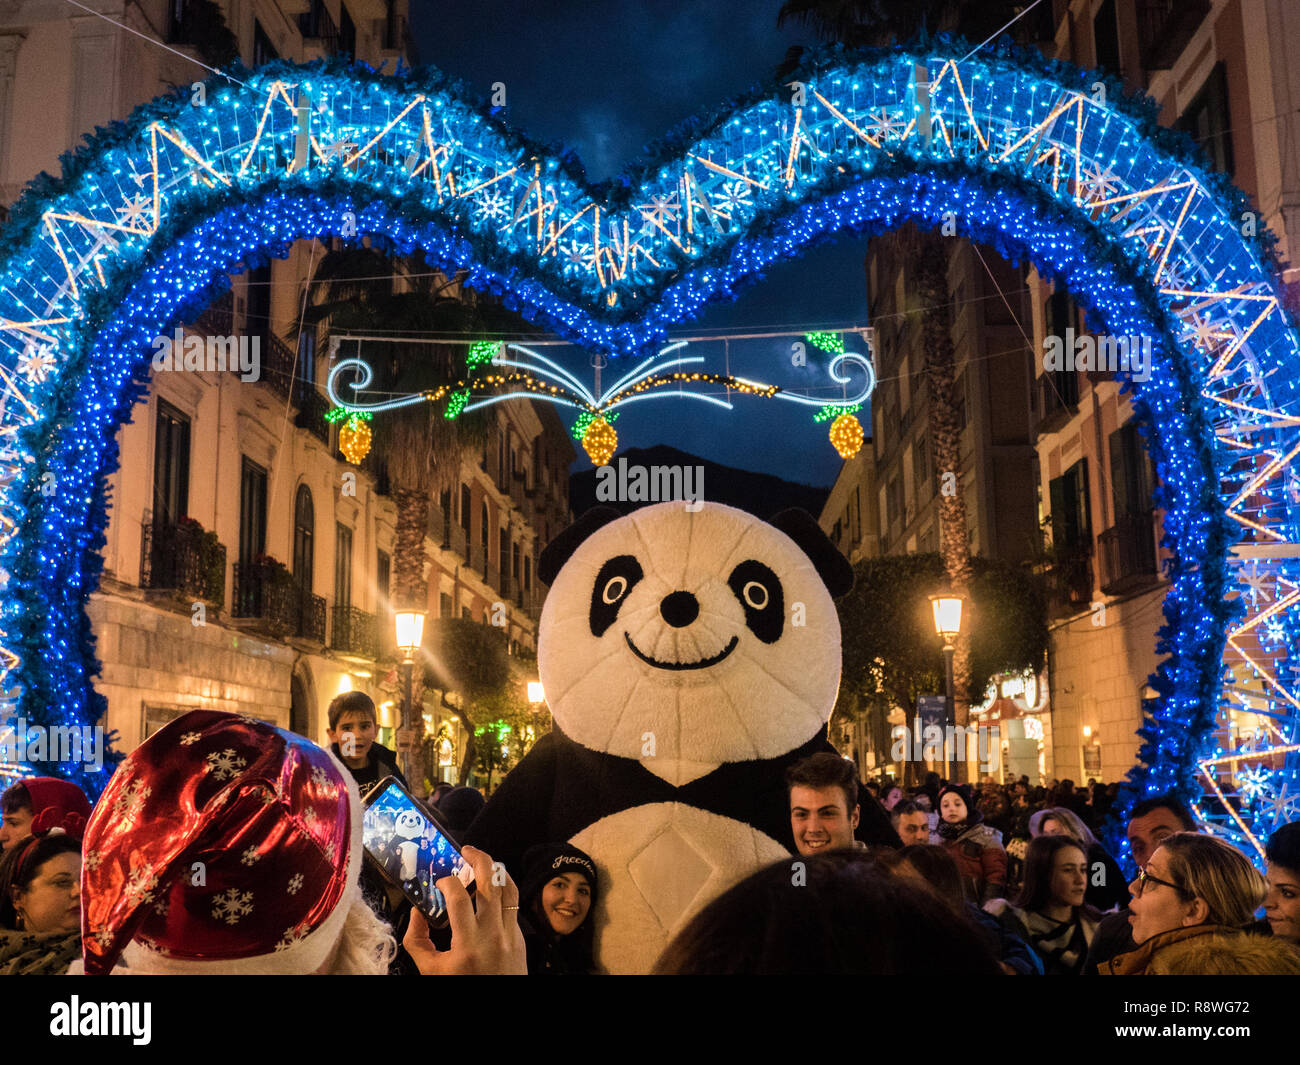 'Giant Panda' posig for photos at Christmas time in Salerno,Campania region, Italy Stock Photo